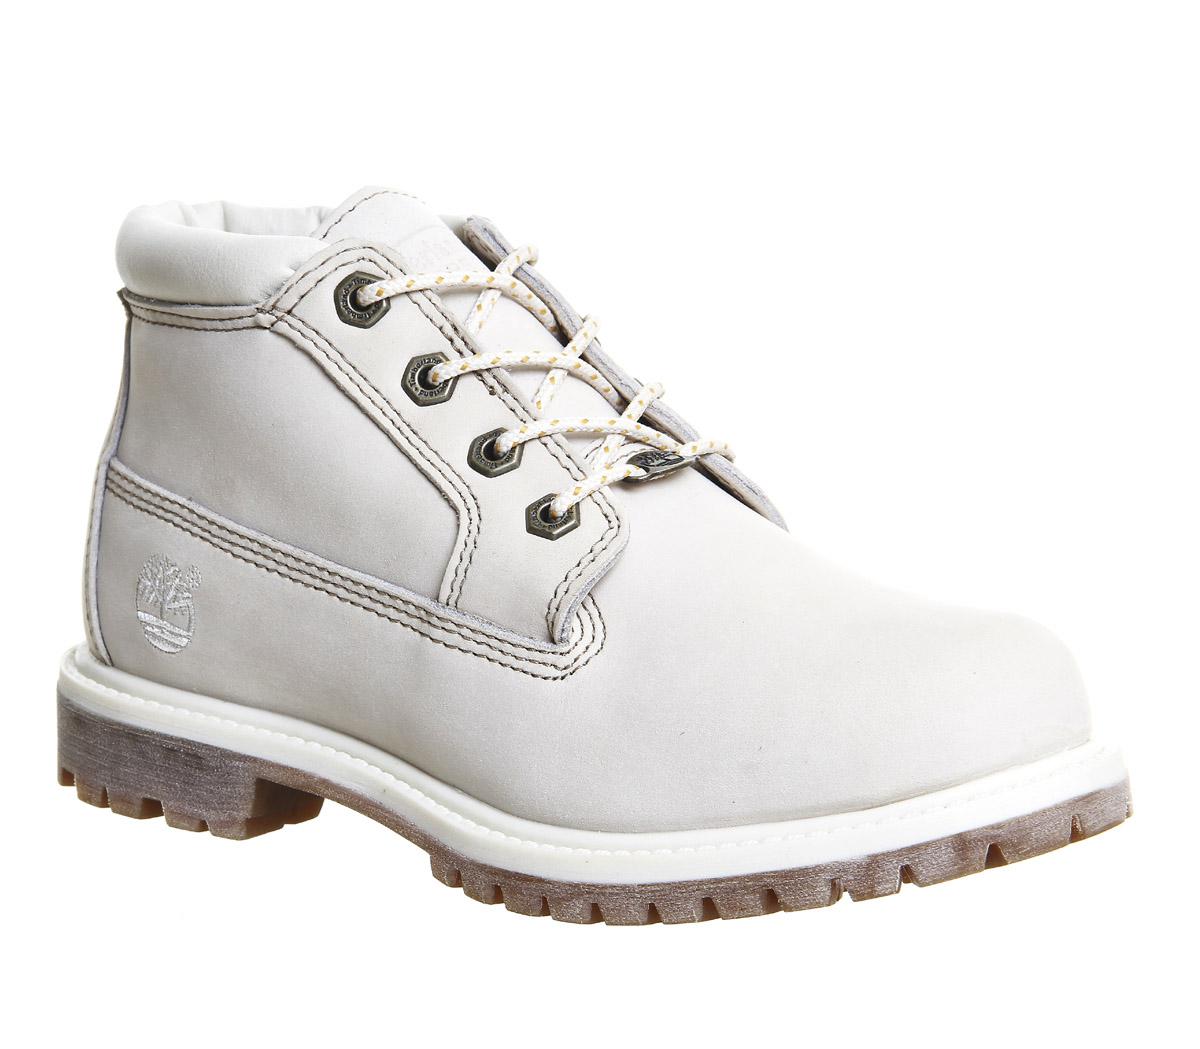 Timberland Nellie Chukka Double Waterproof Boots in White - Lyst